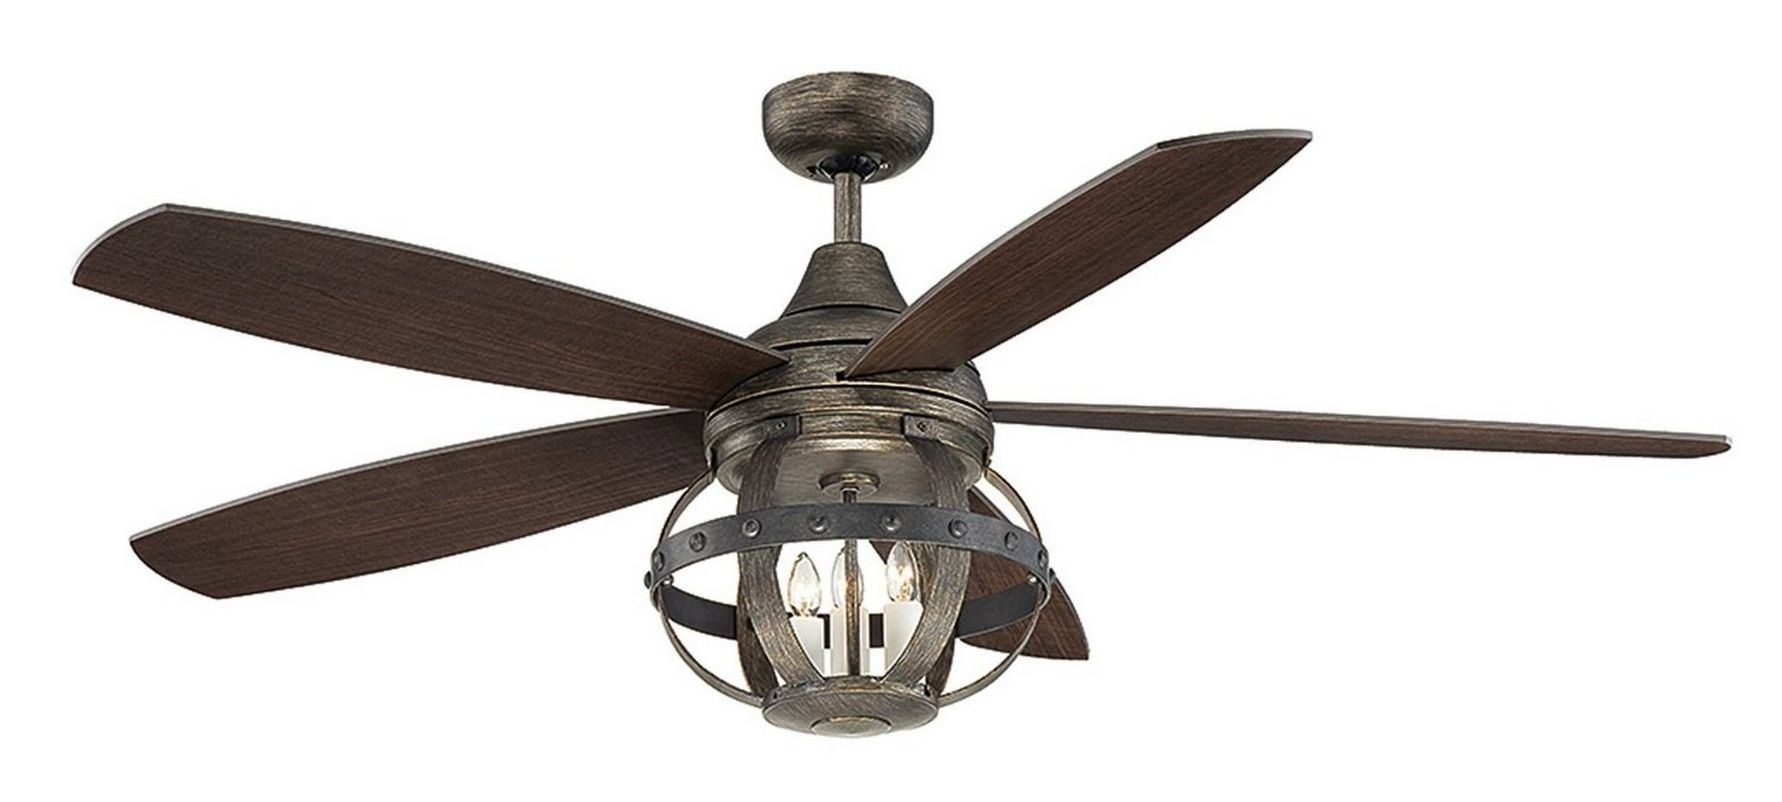 Industrial Outdoor Ceiling Fan With Light Industrial Outdoor Ceiling Intended For Most Recent Industrial Outdoor Ceiling Fans (View 6 of 20)